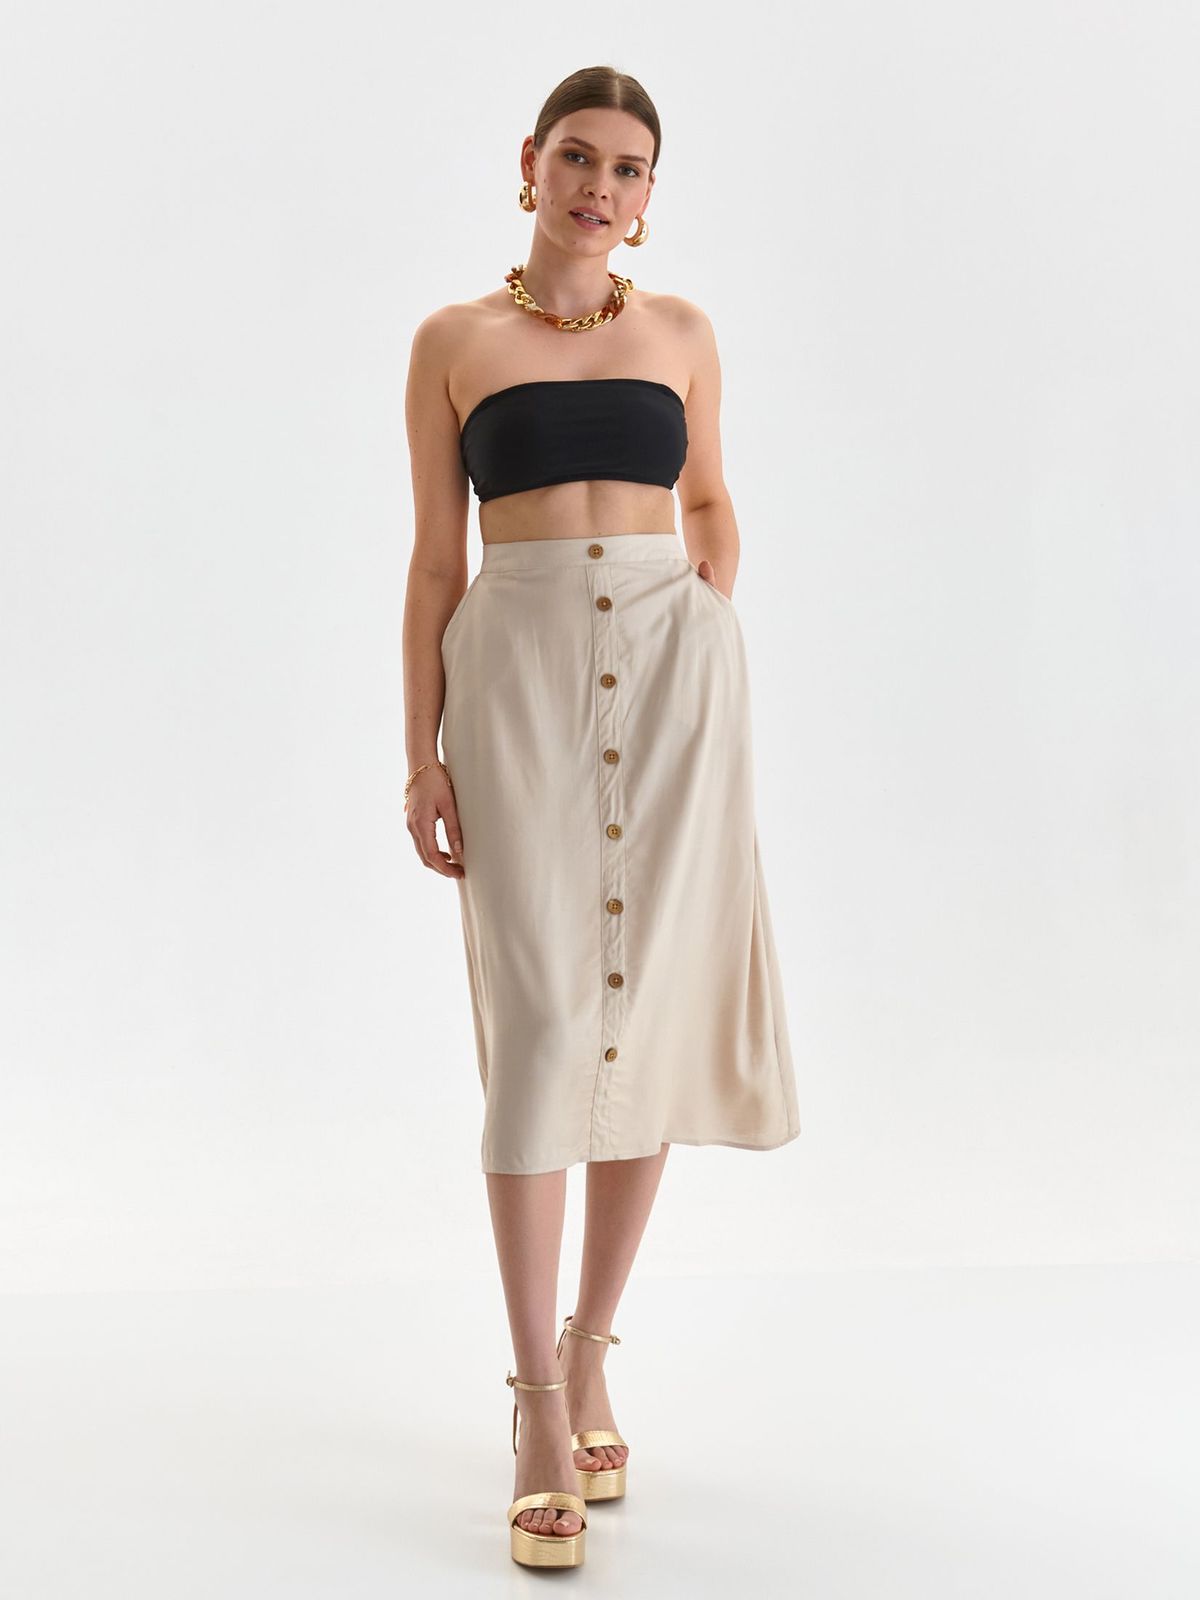 Beige skirt thin fabric cloche lateral pockets with decorative buttons